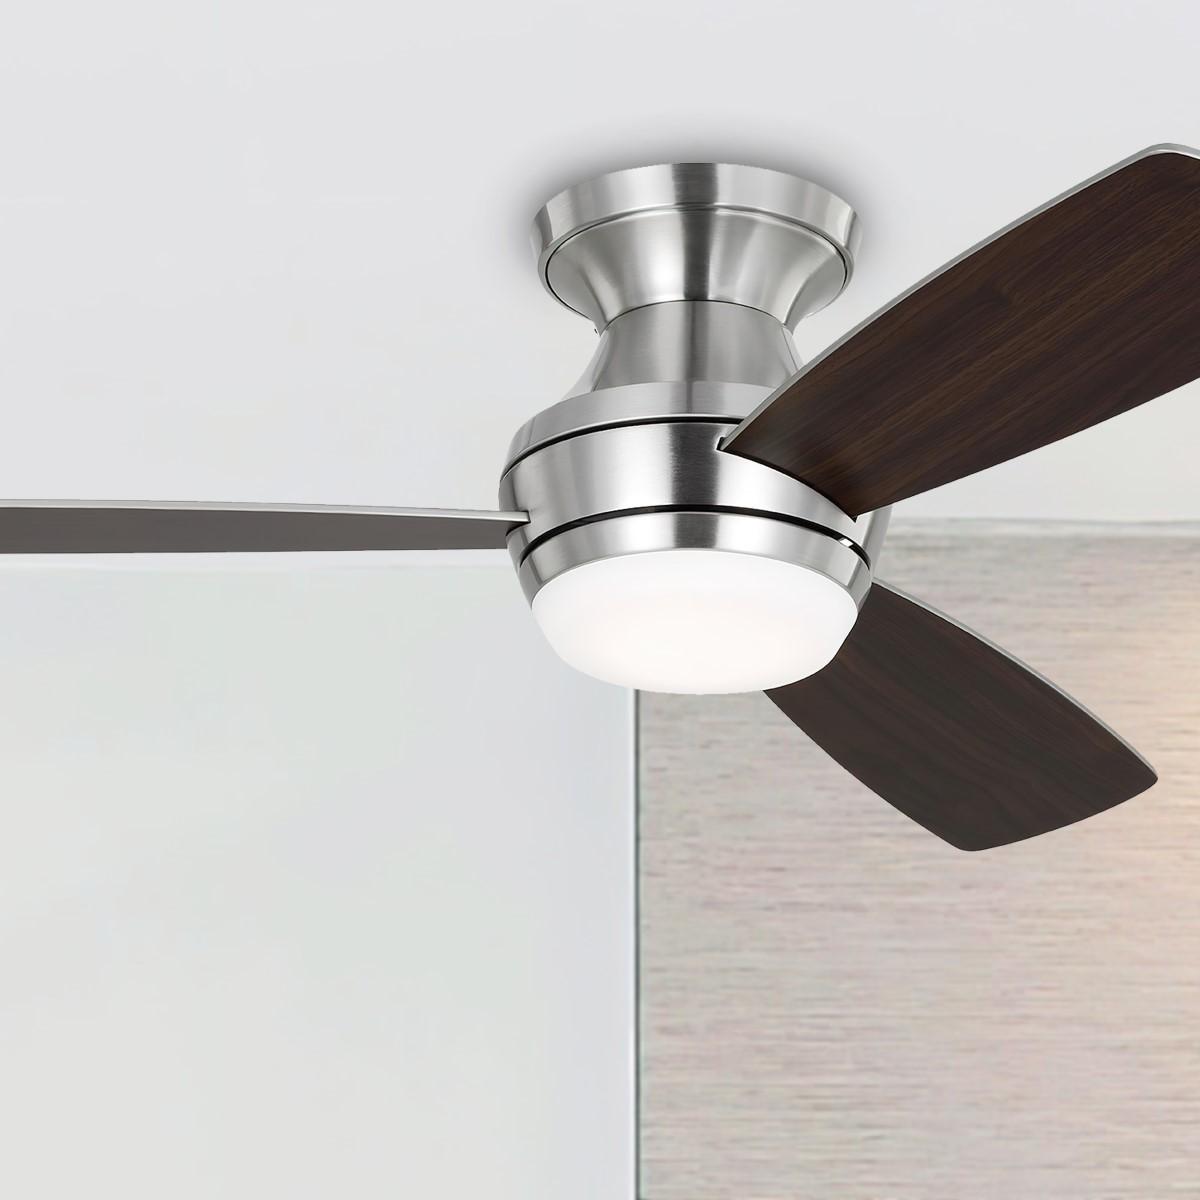 Ikon 44 In. Flush Mount Ceiling Fan With Light And Remote